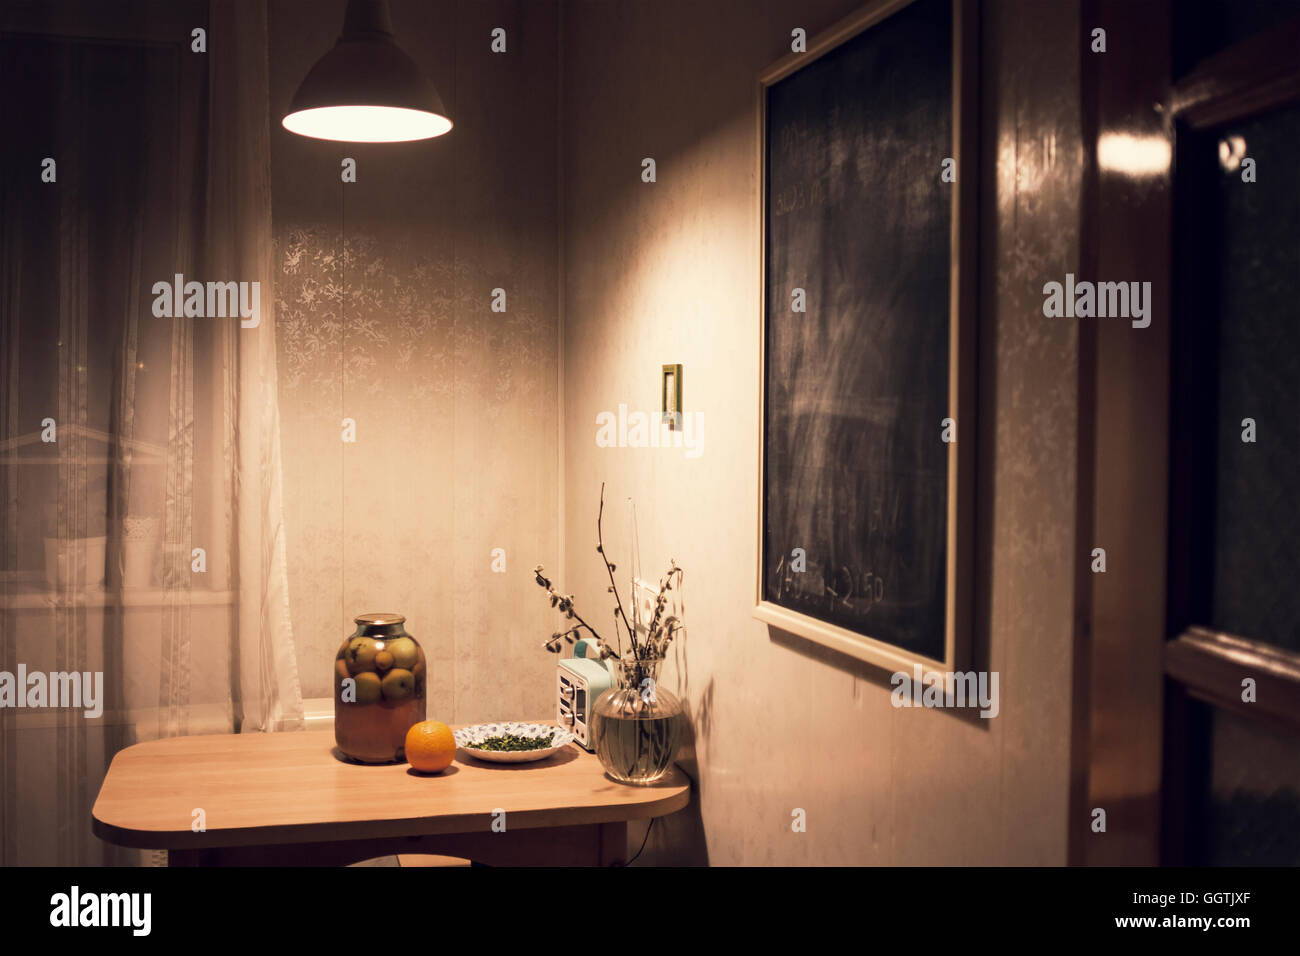 Food on corner table in kitchen with blackboard Stock Photo